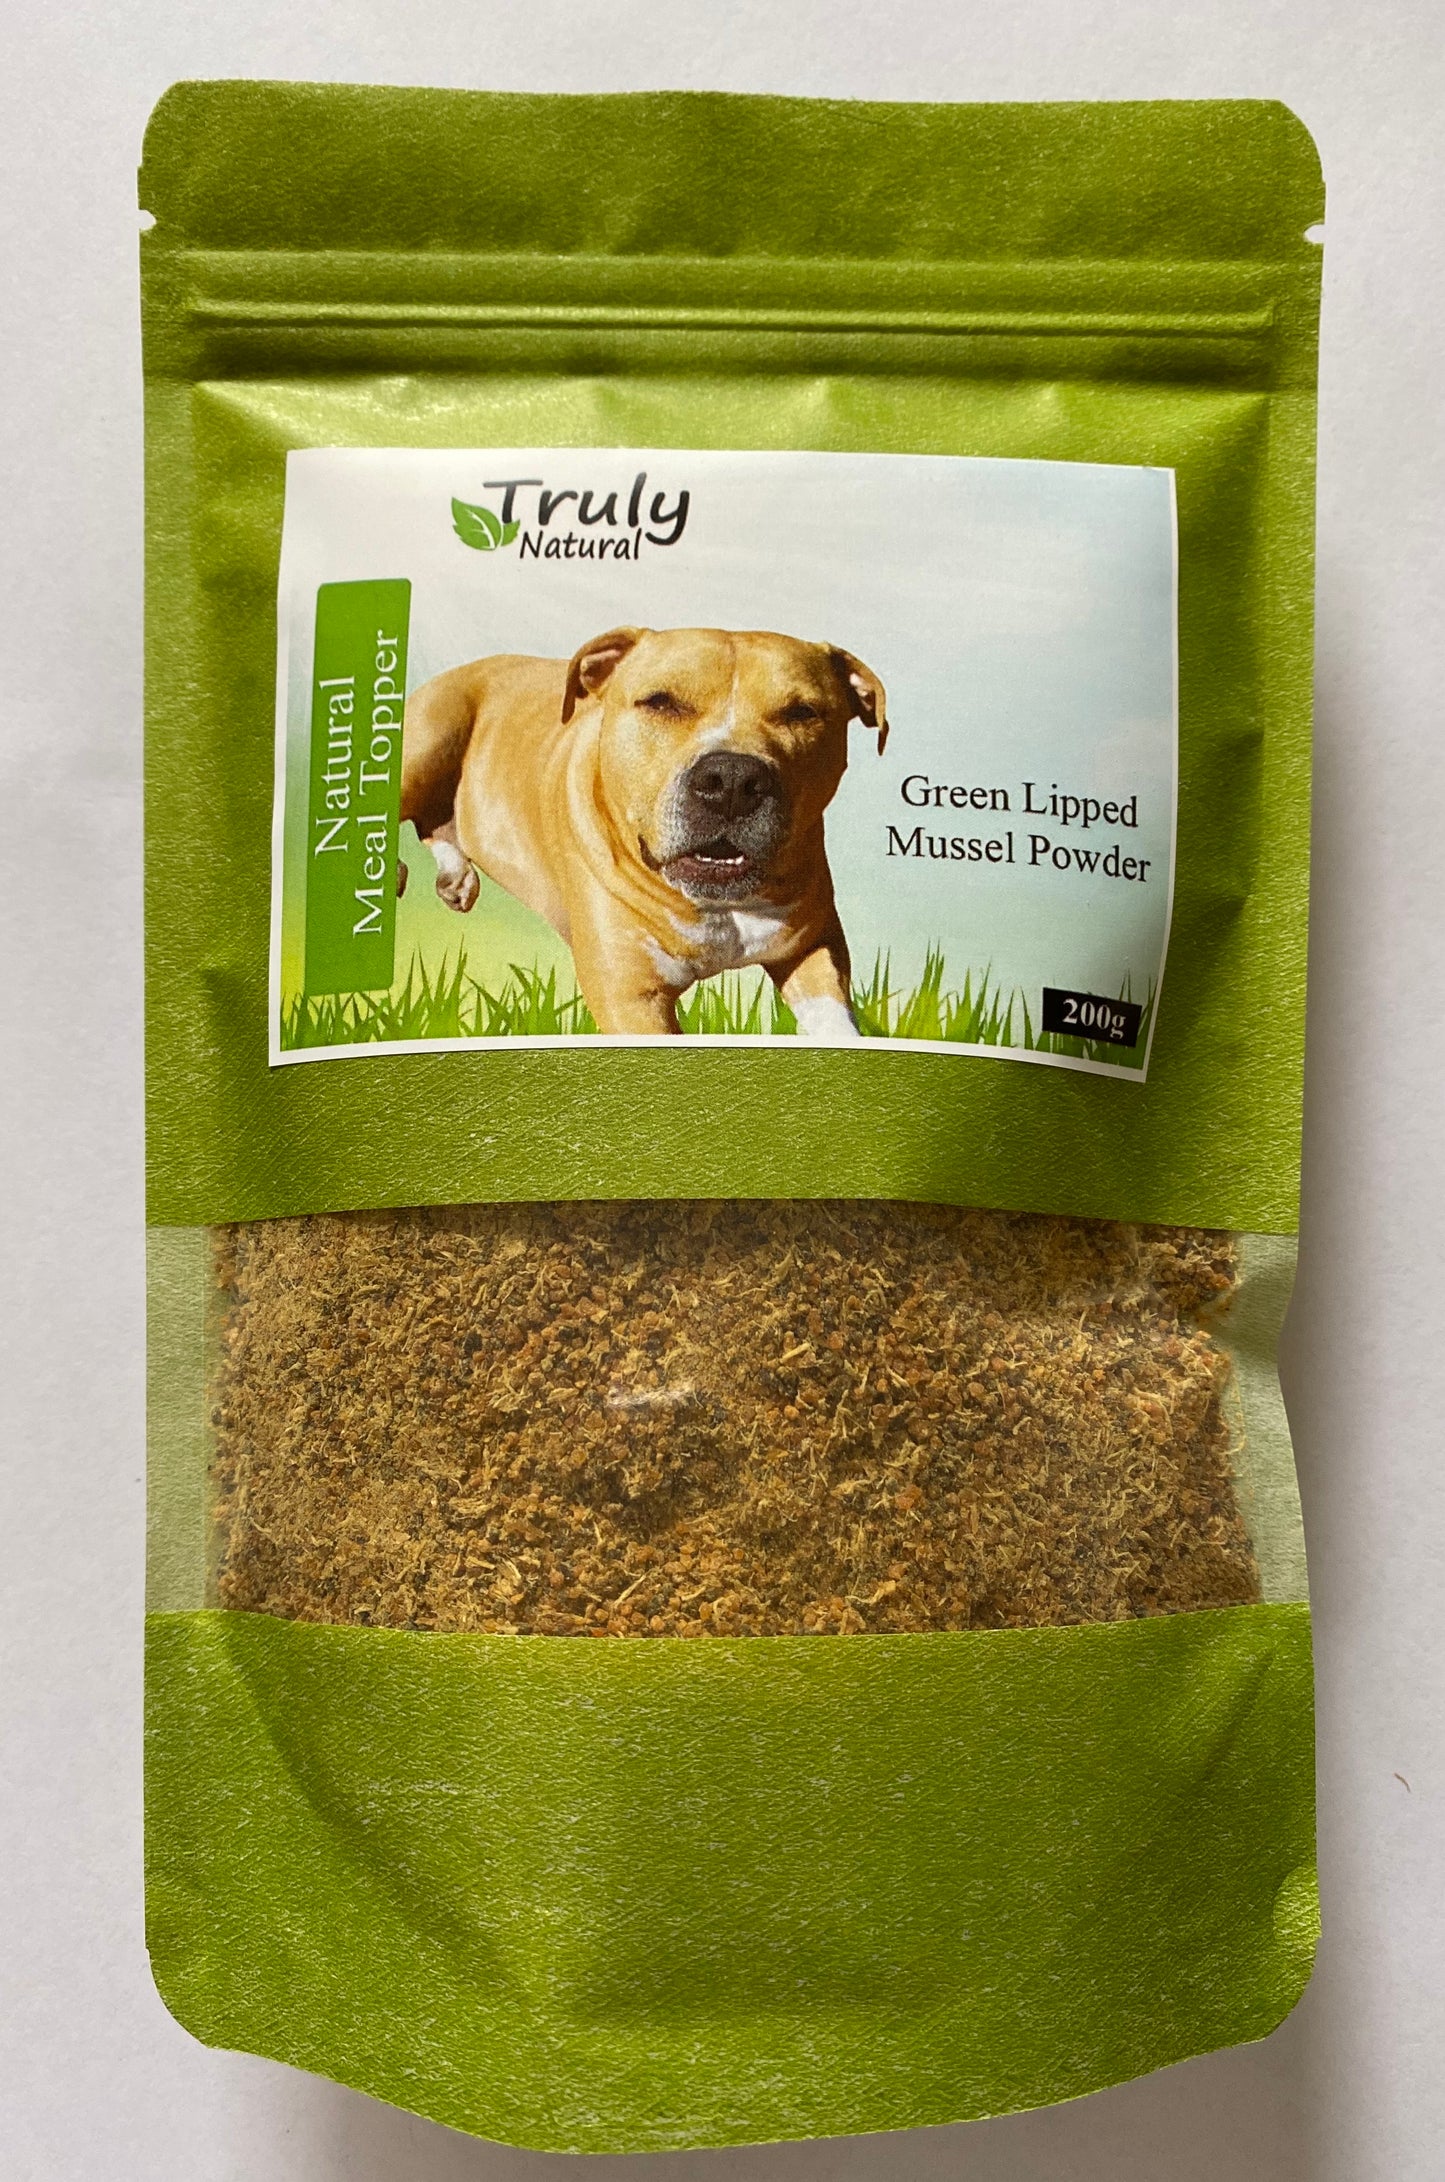 Truly Natural 200g Green Lipped Mussel Powder